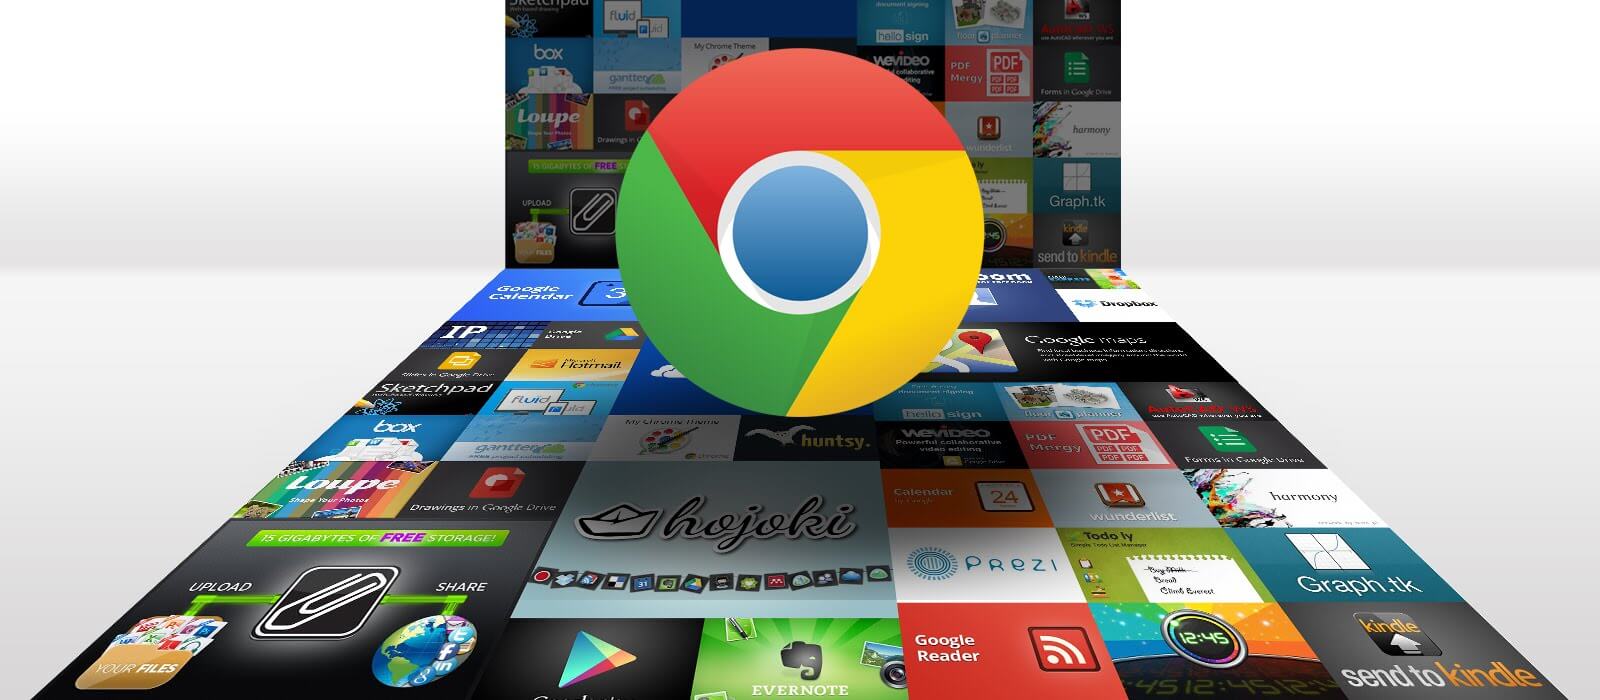 Google Chrome API changes could break support for numerous plugins